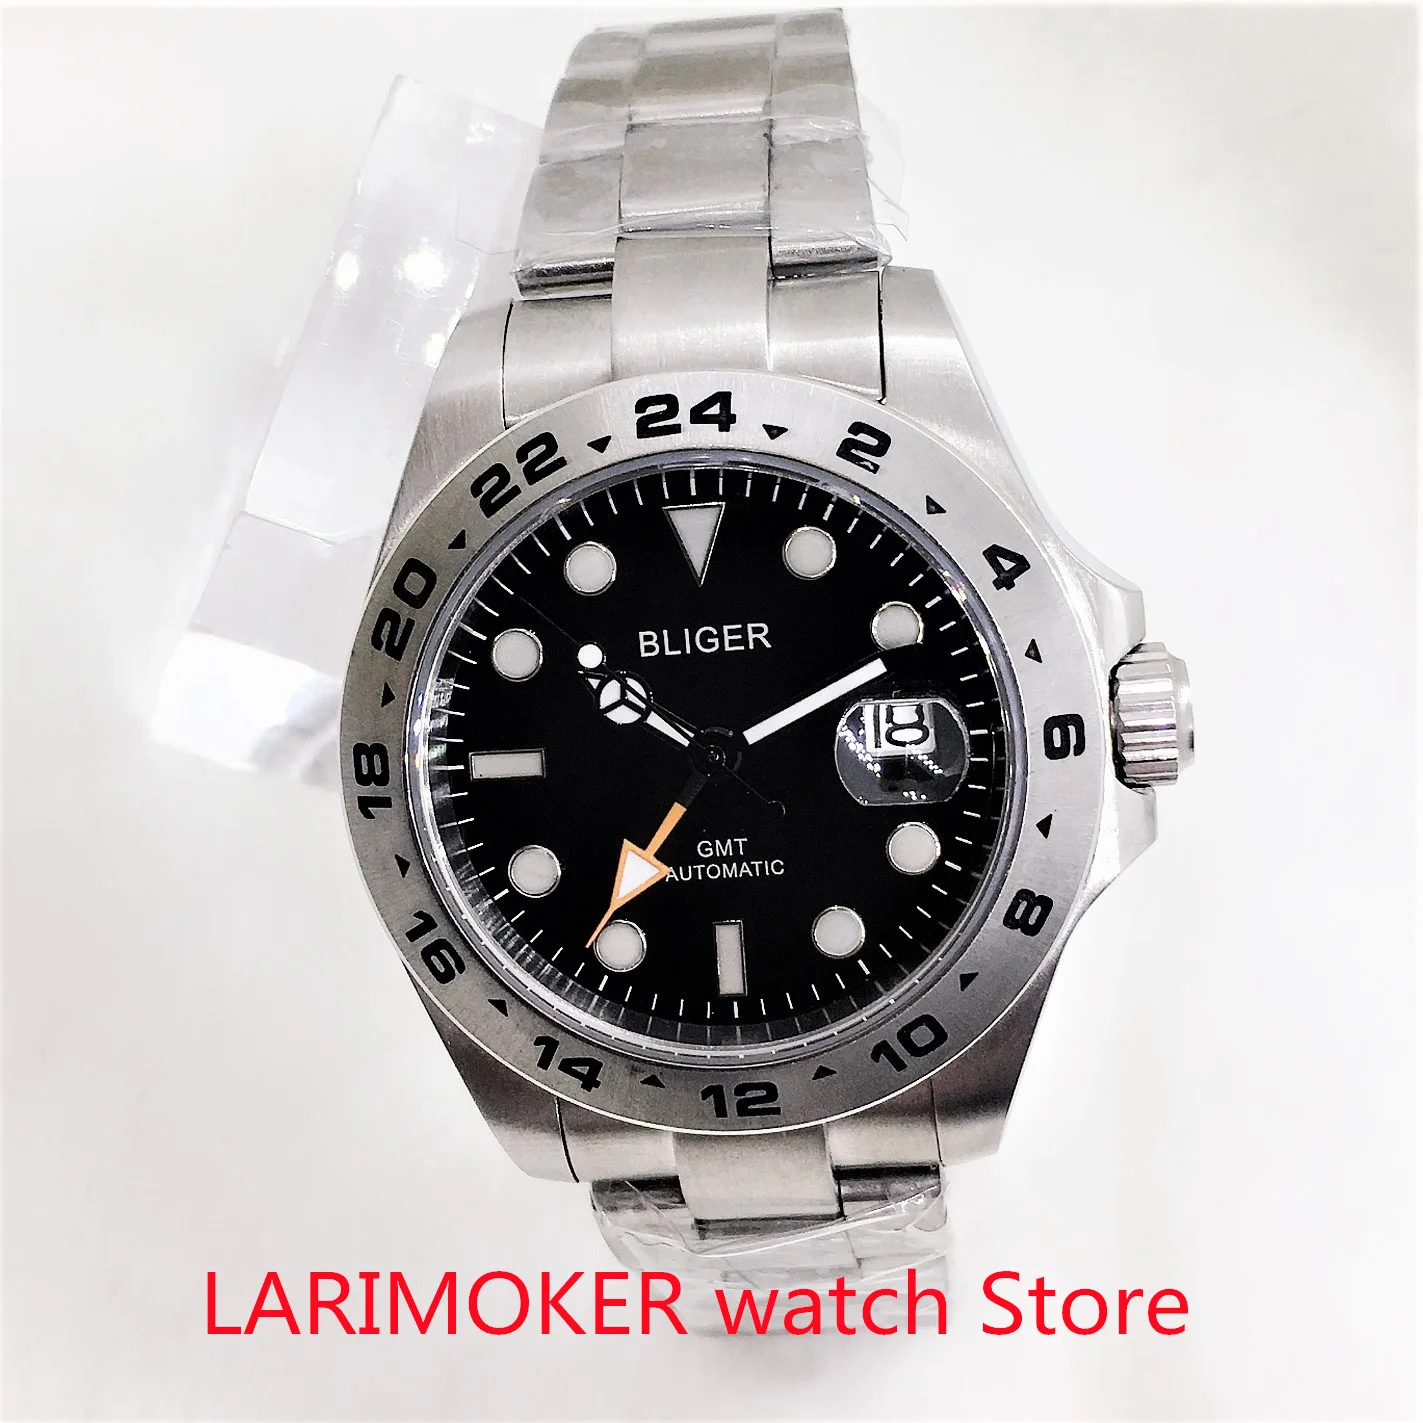 

43mm BLIGER Black Dial GMT Function Men's Wristwatch Sapphire Crystal Solver Color Bezel Auto Date Stainless Steel Band